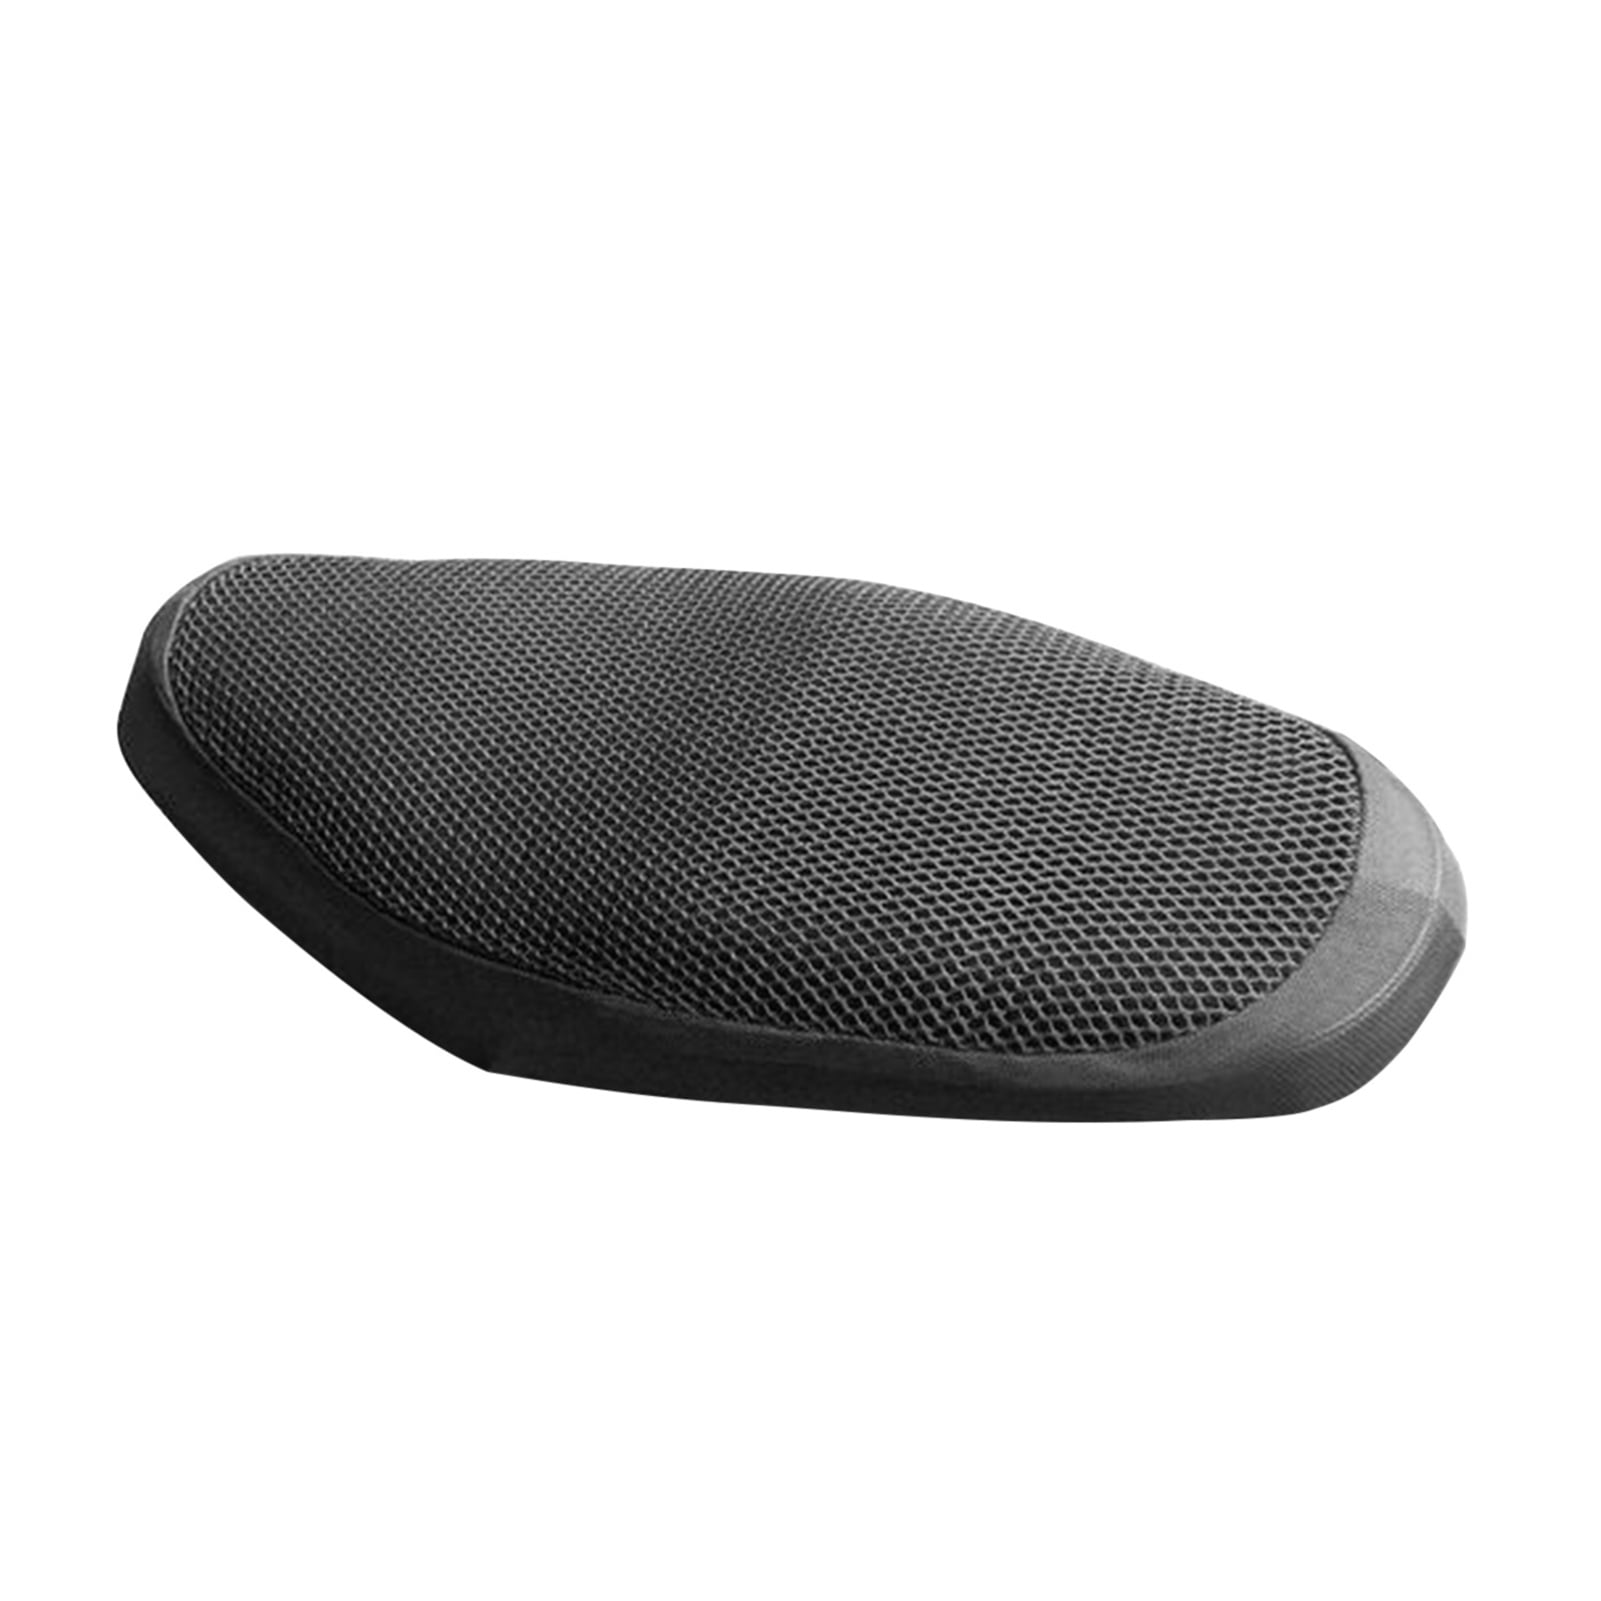 Motorcycle Electric Bike Seat Cover Summer Breathable 3d Mesh Fabric  Anti-skid Pad Scooter Seat Covers Cushion Net Cover